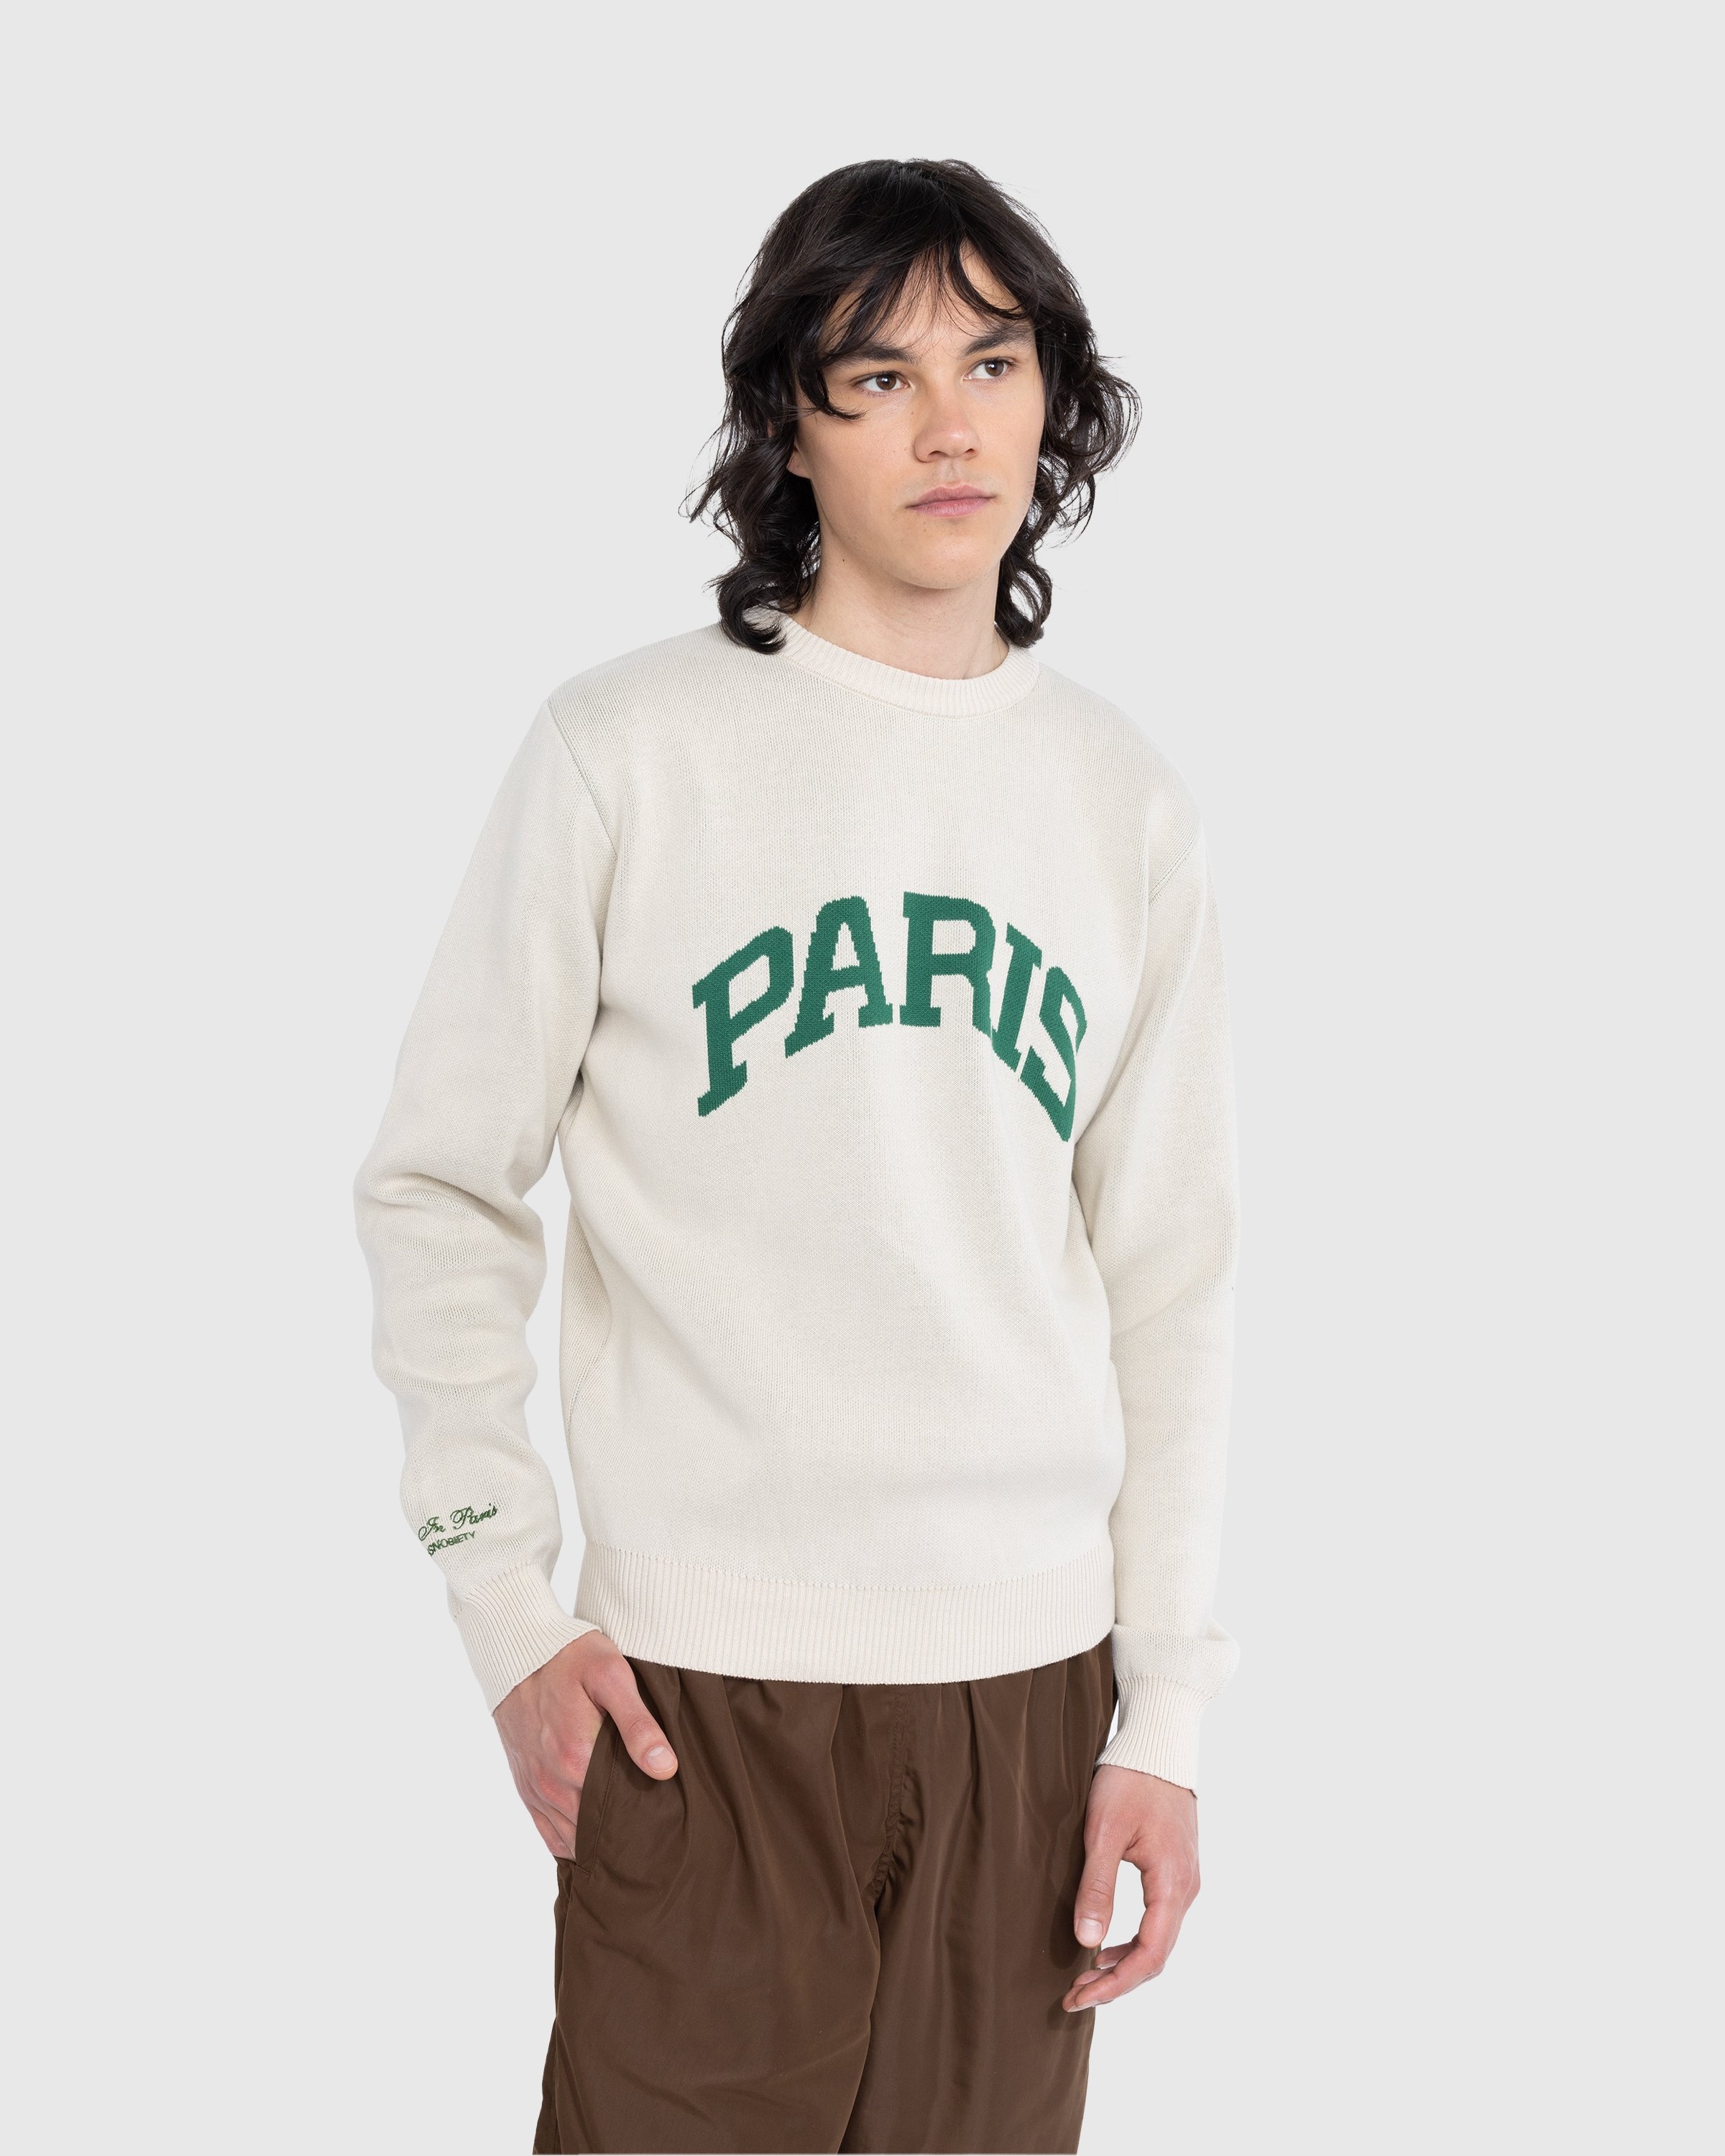 Highsnobiety – Not in Paris 5 Knitted Sweater - Sweats - Beige - Image 2